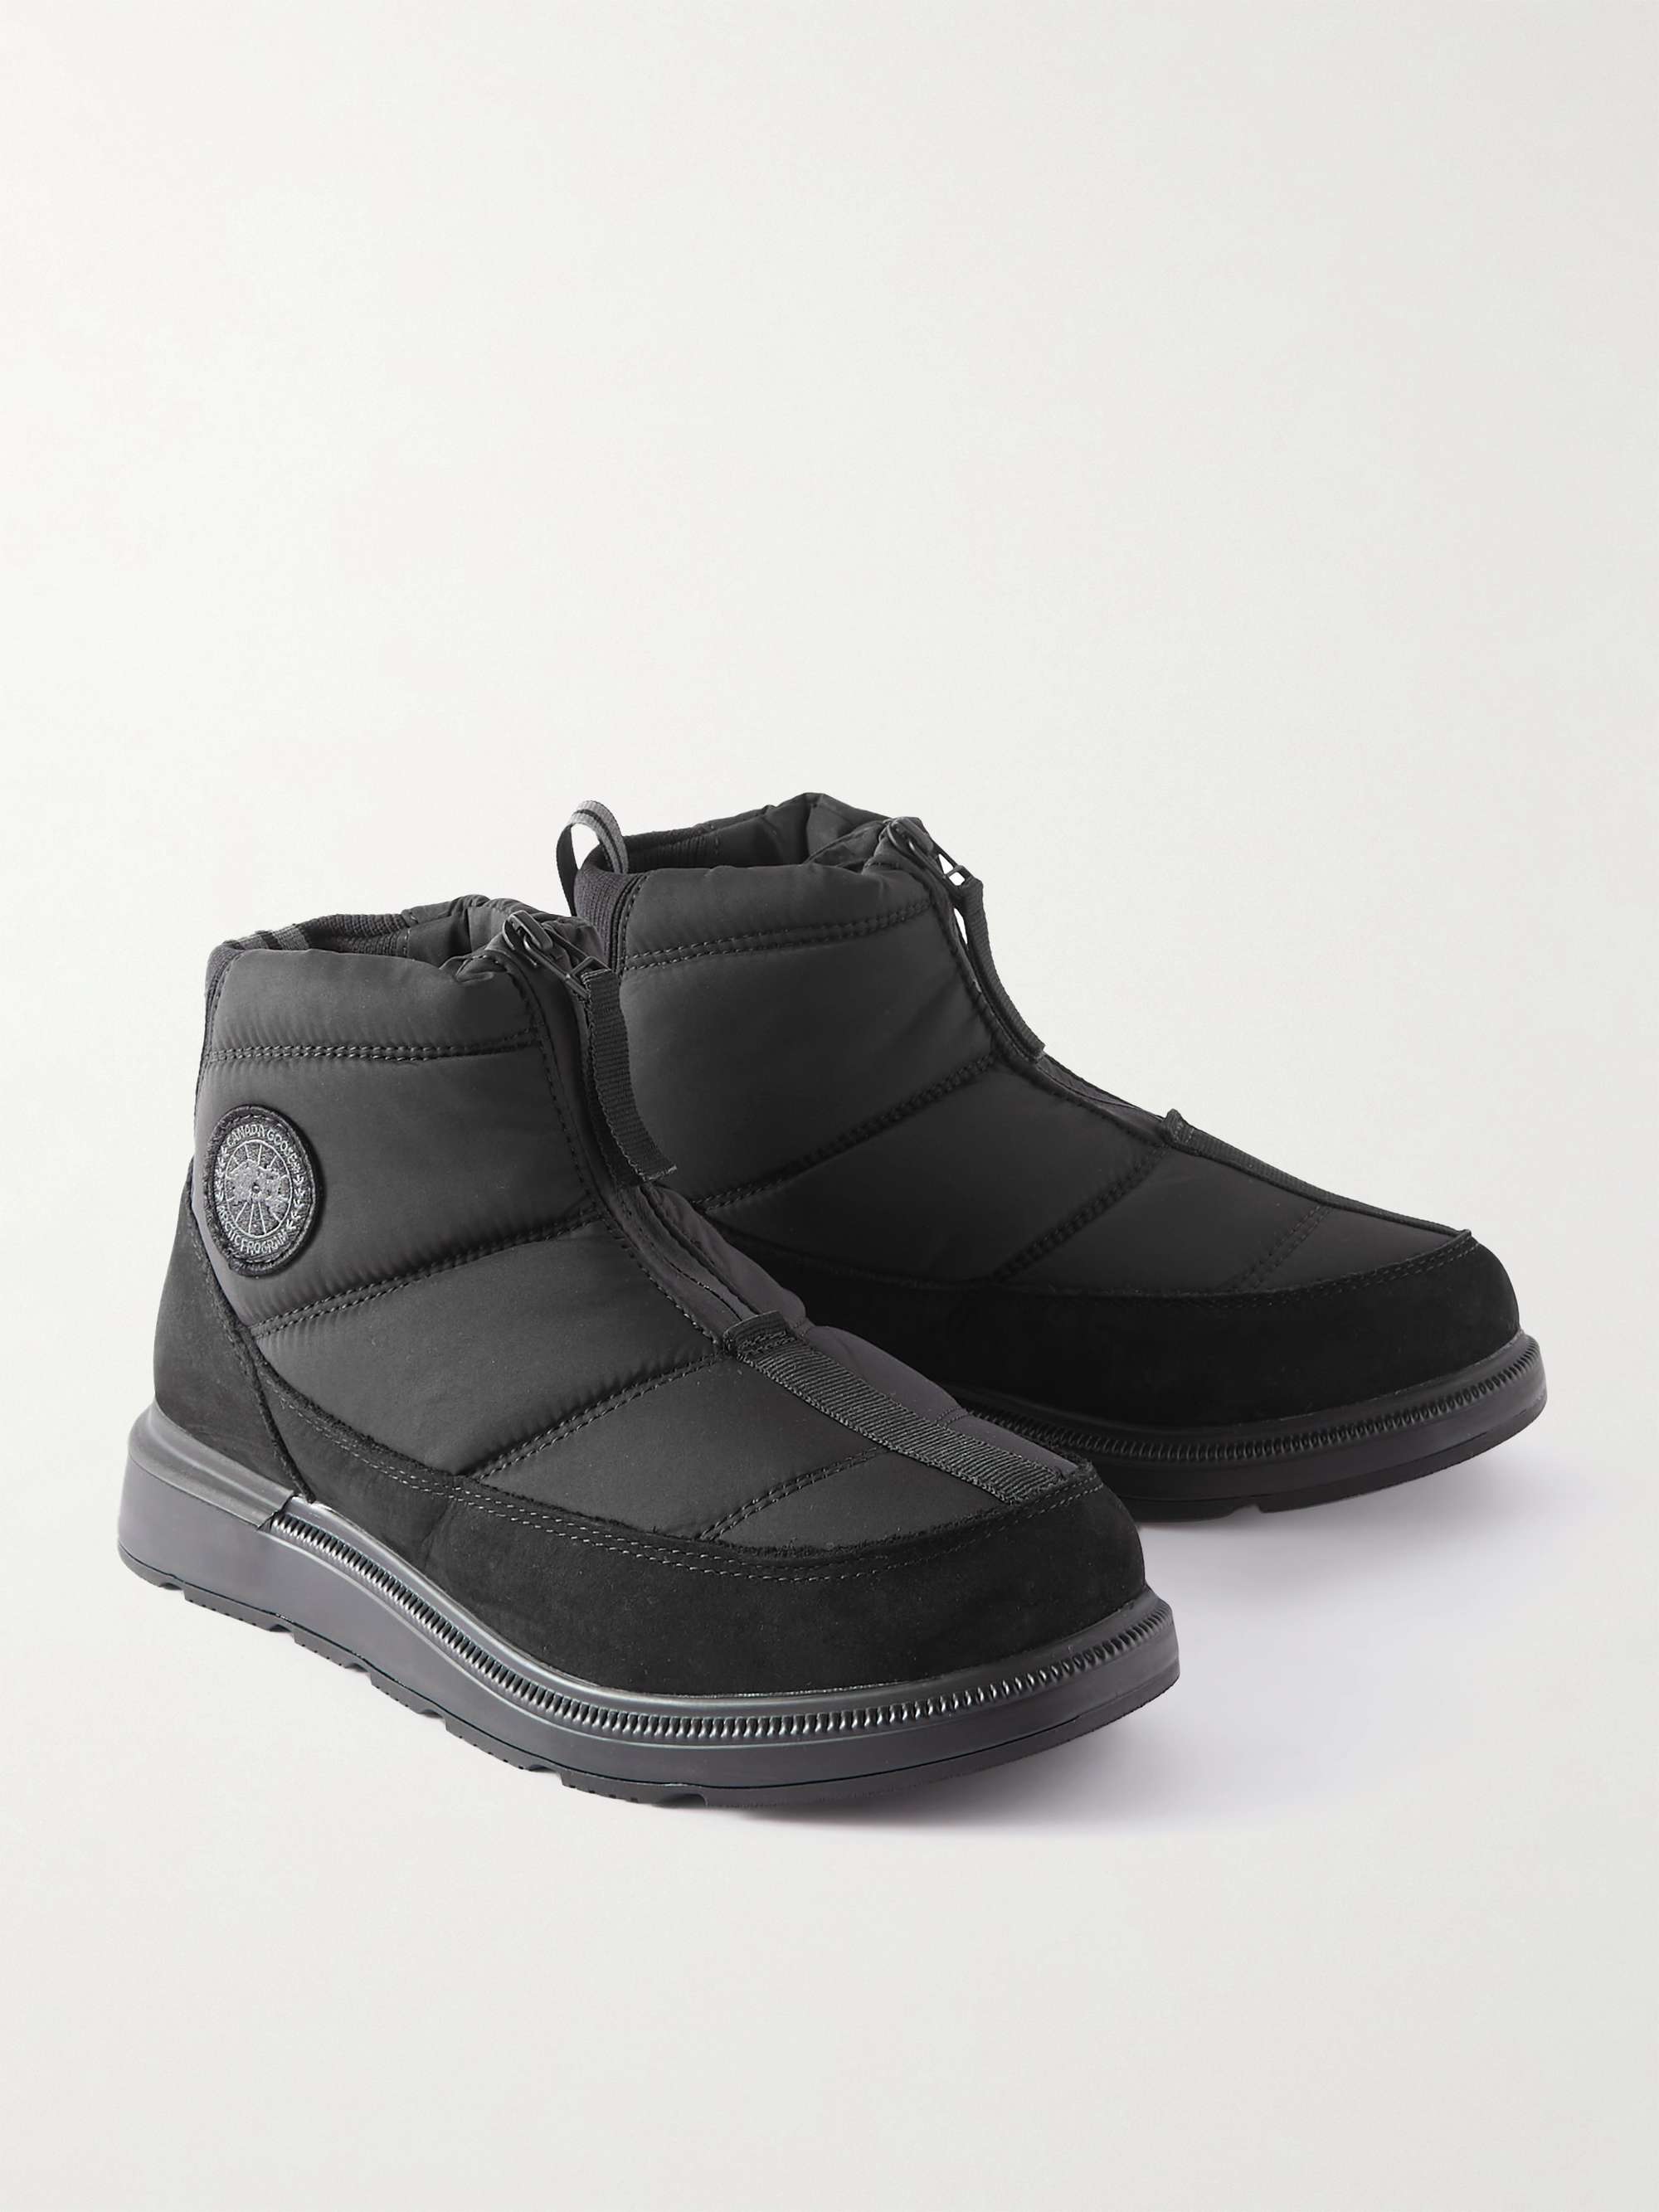 CANADA GOOSE Crofton Leather-Trimmed Quilted Shell Boots